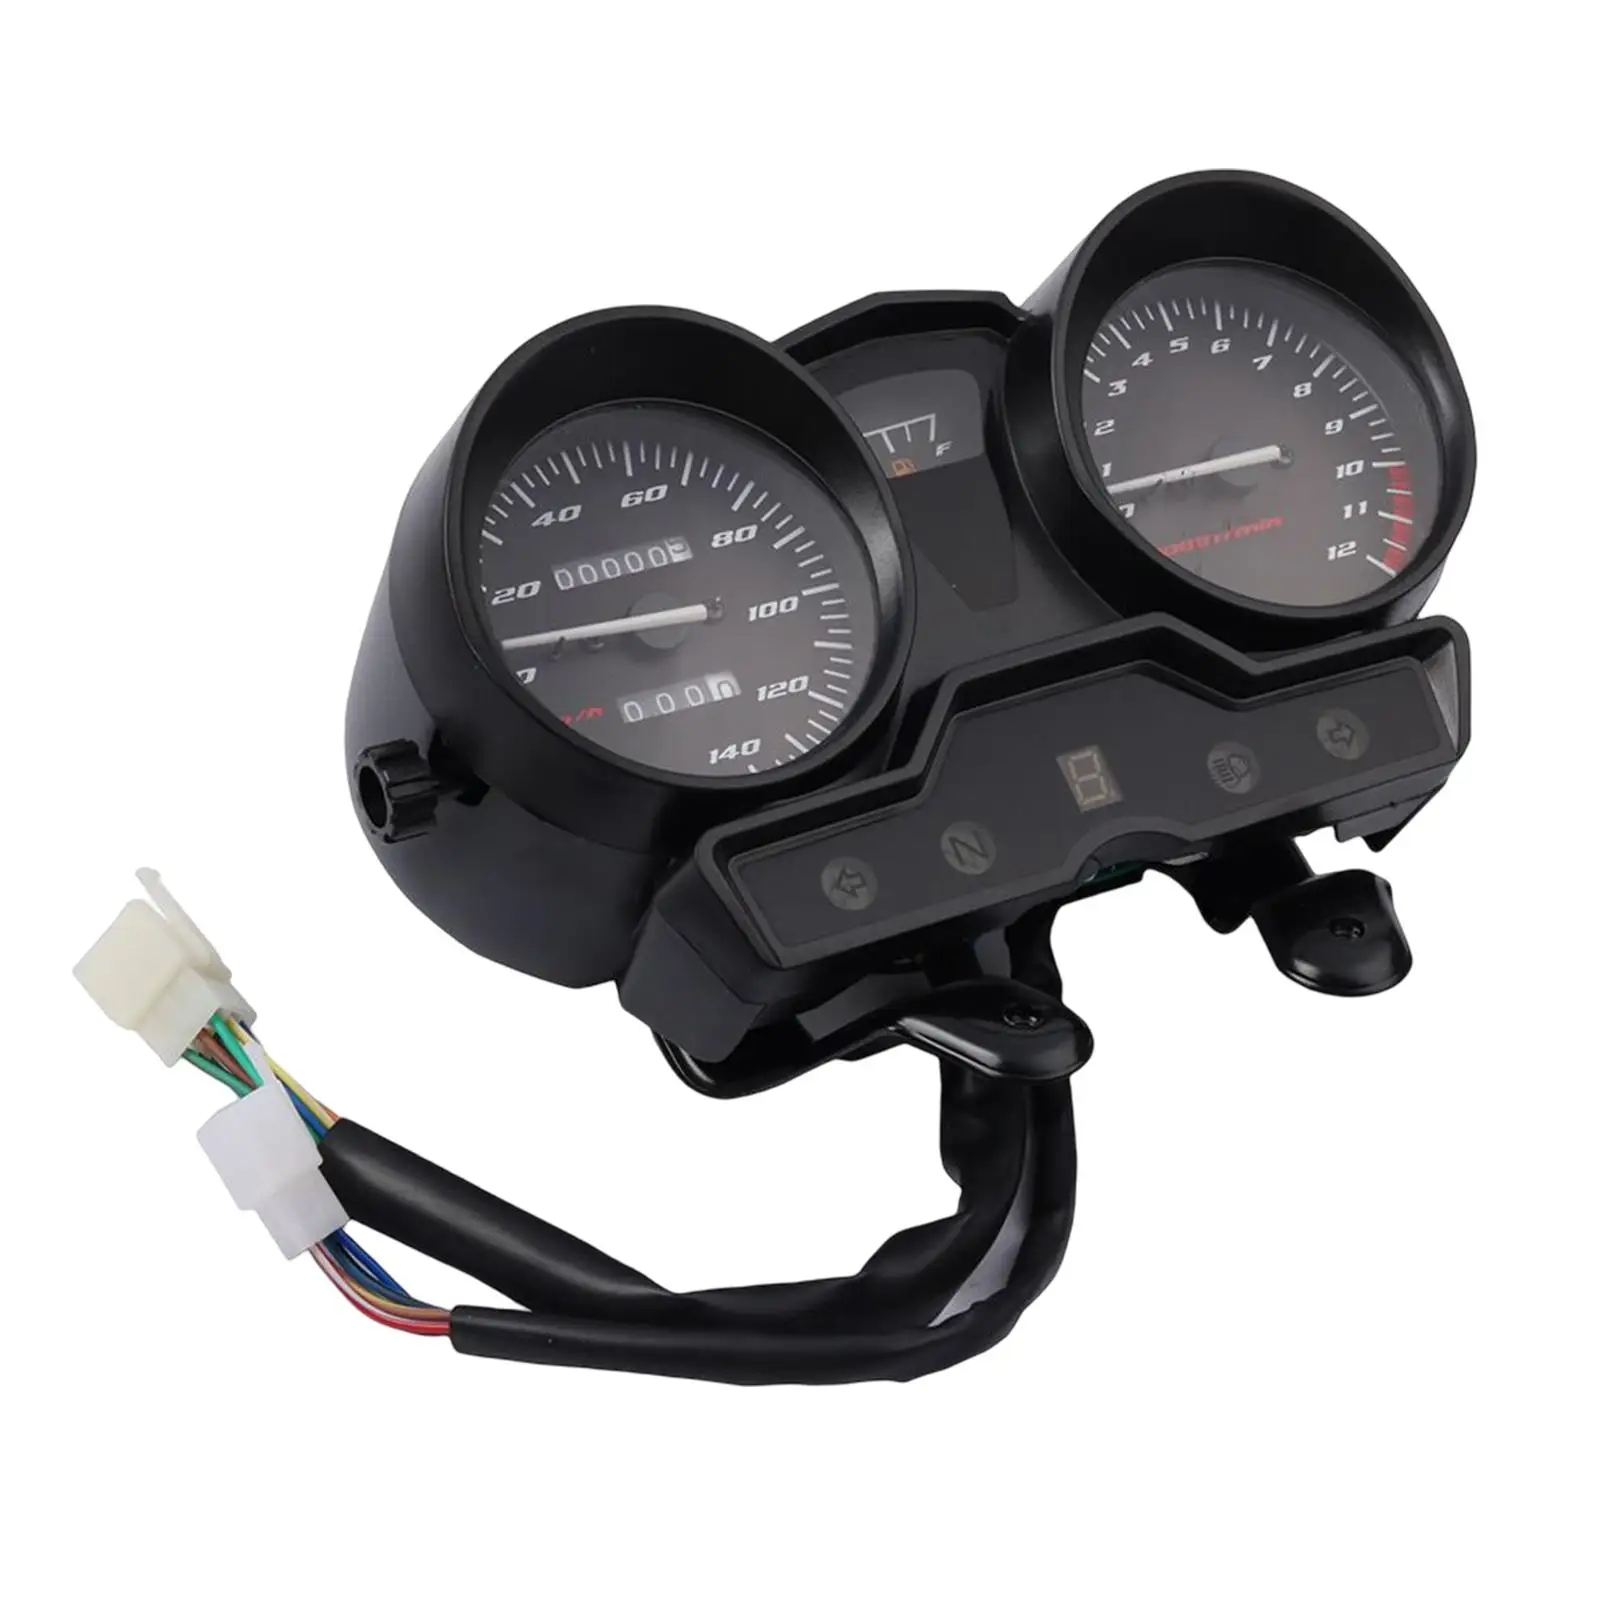 LED Digital Dashboard Motorcycle RPM Meter Speedometer Guage Replacement High